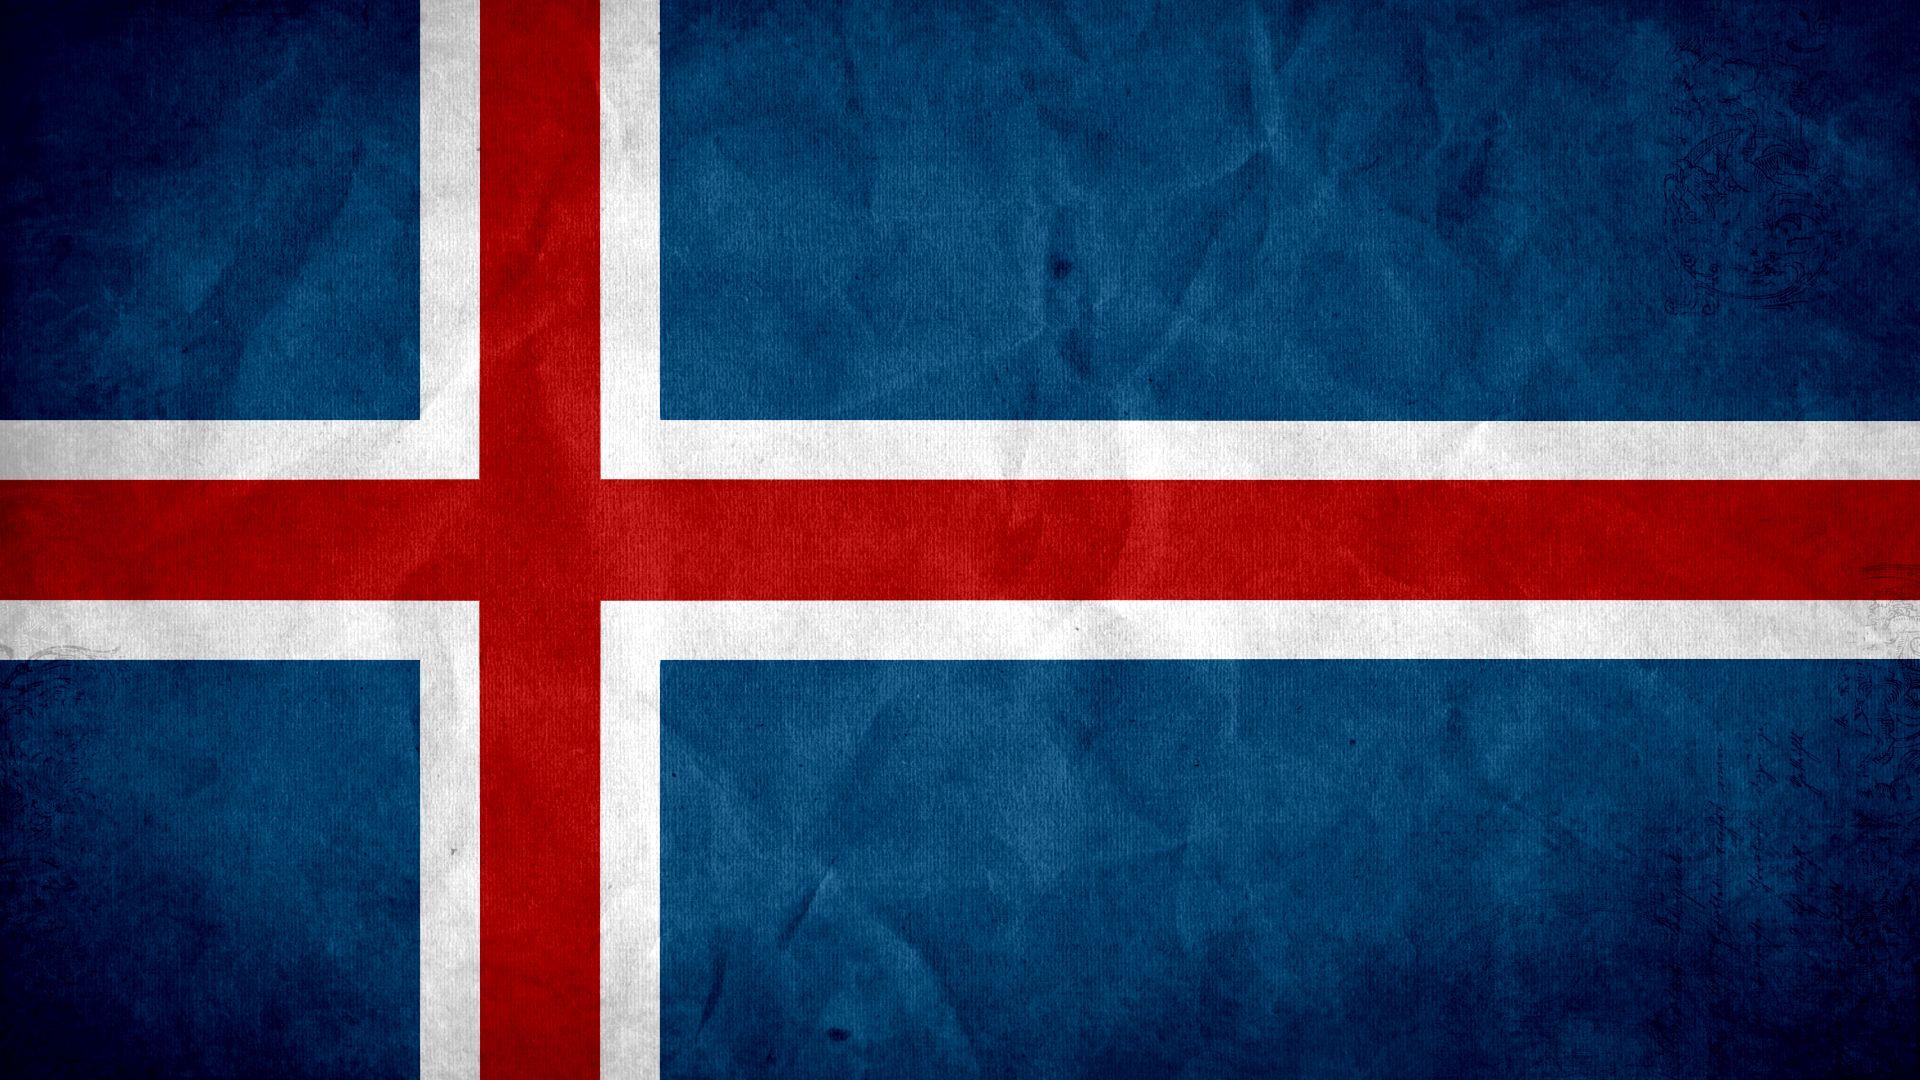 A picture of the national flag of Iceland